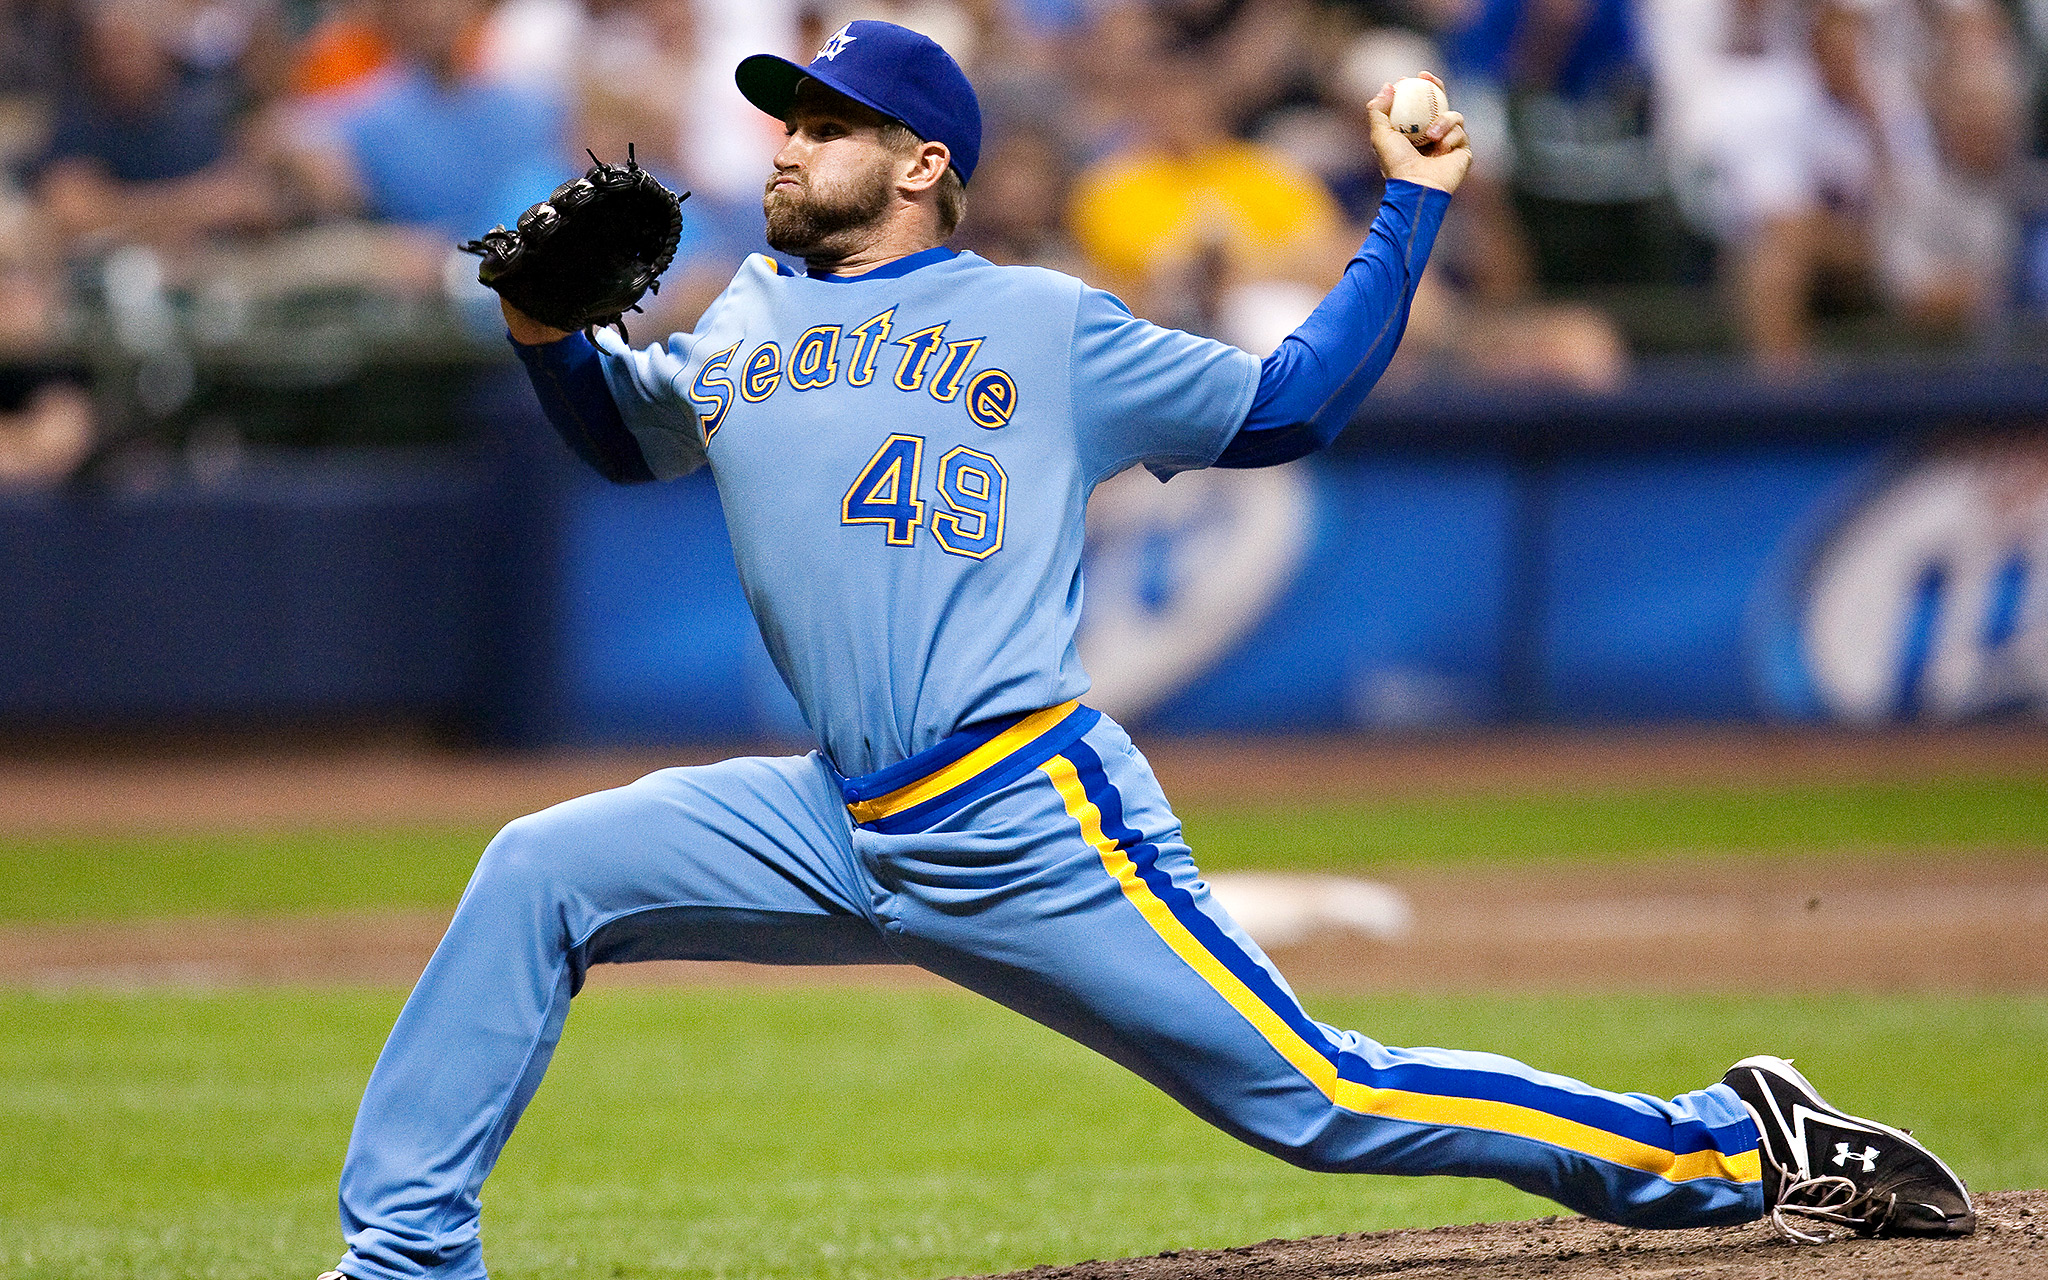 seattle mariners throwback uniforms